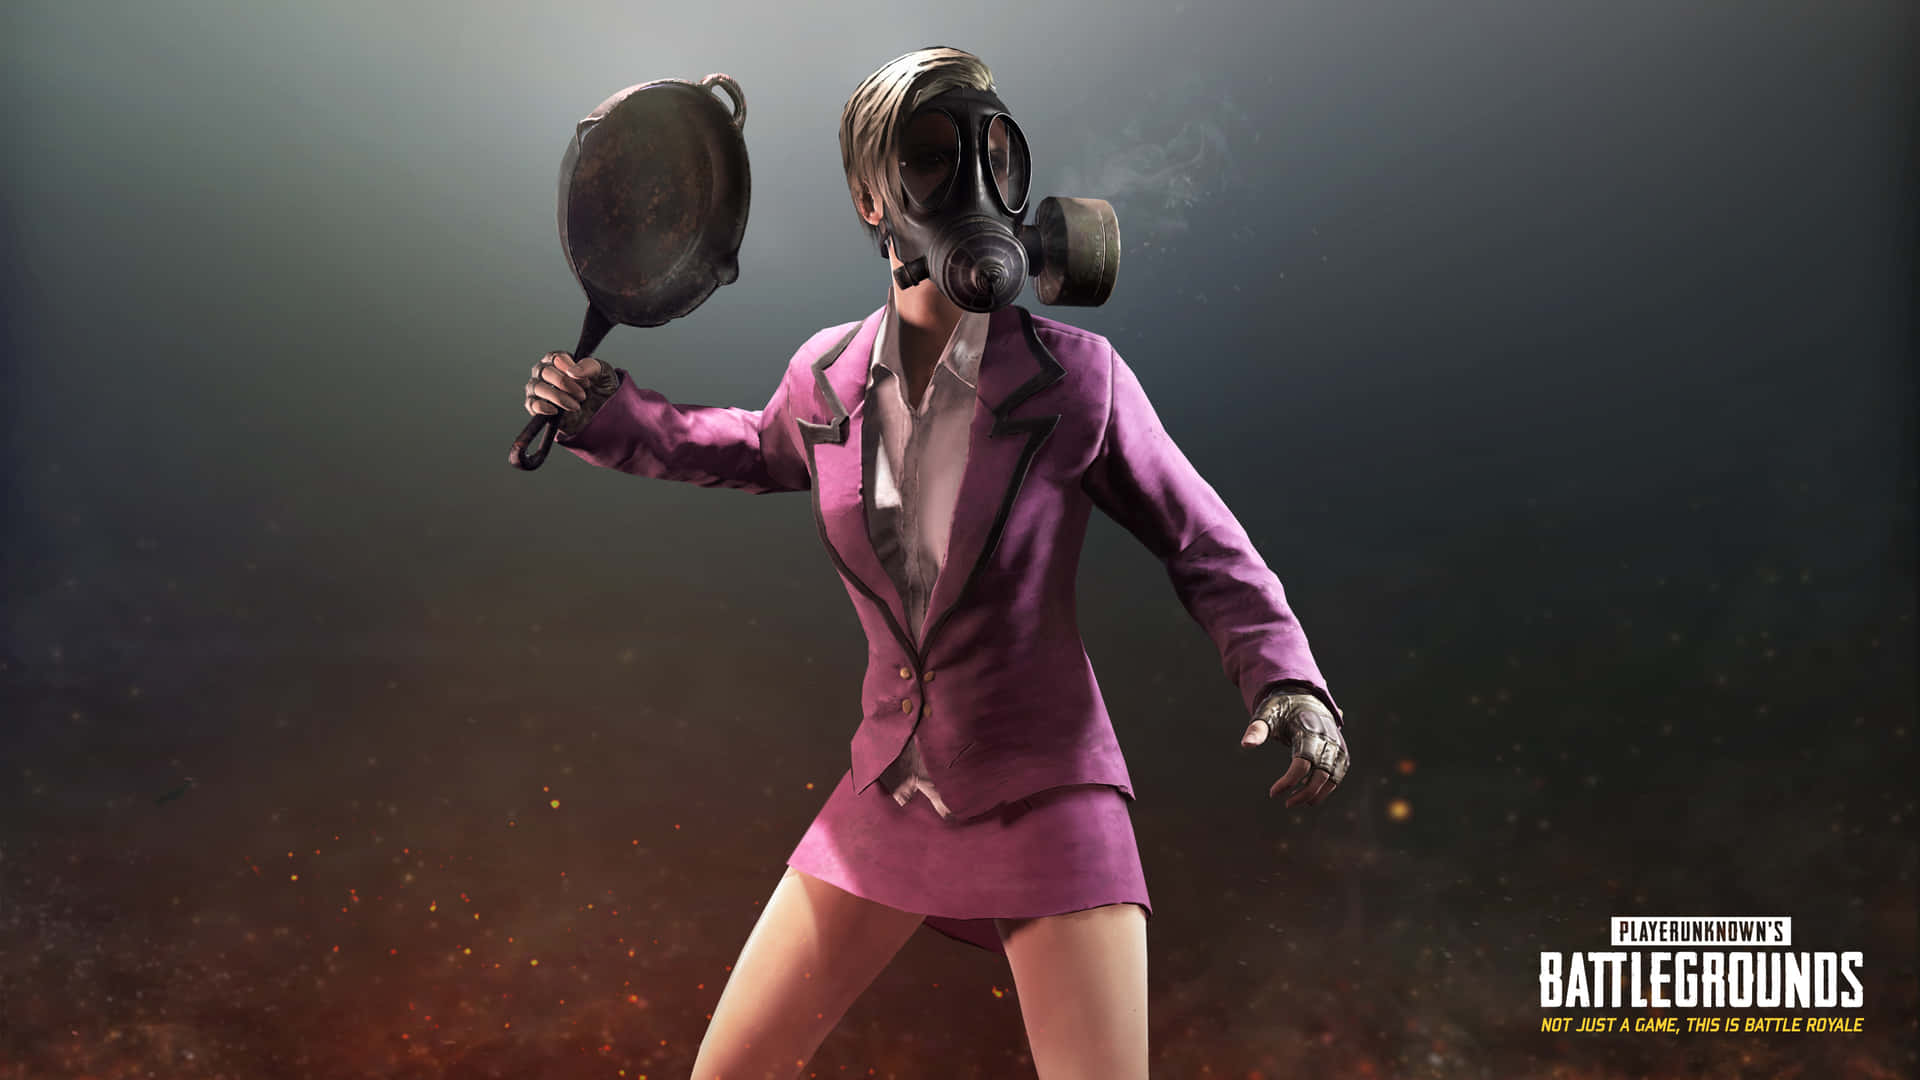 A Woman In A Suit With A Pan On Her Head